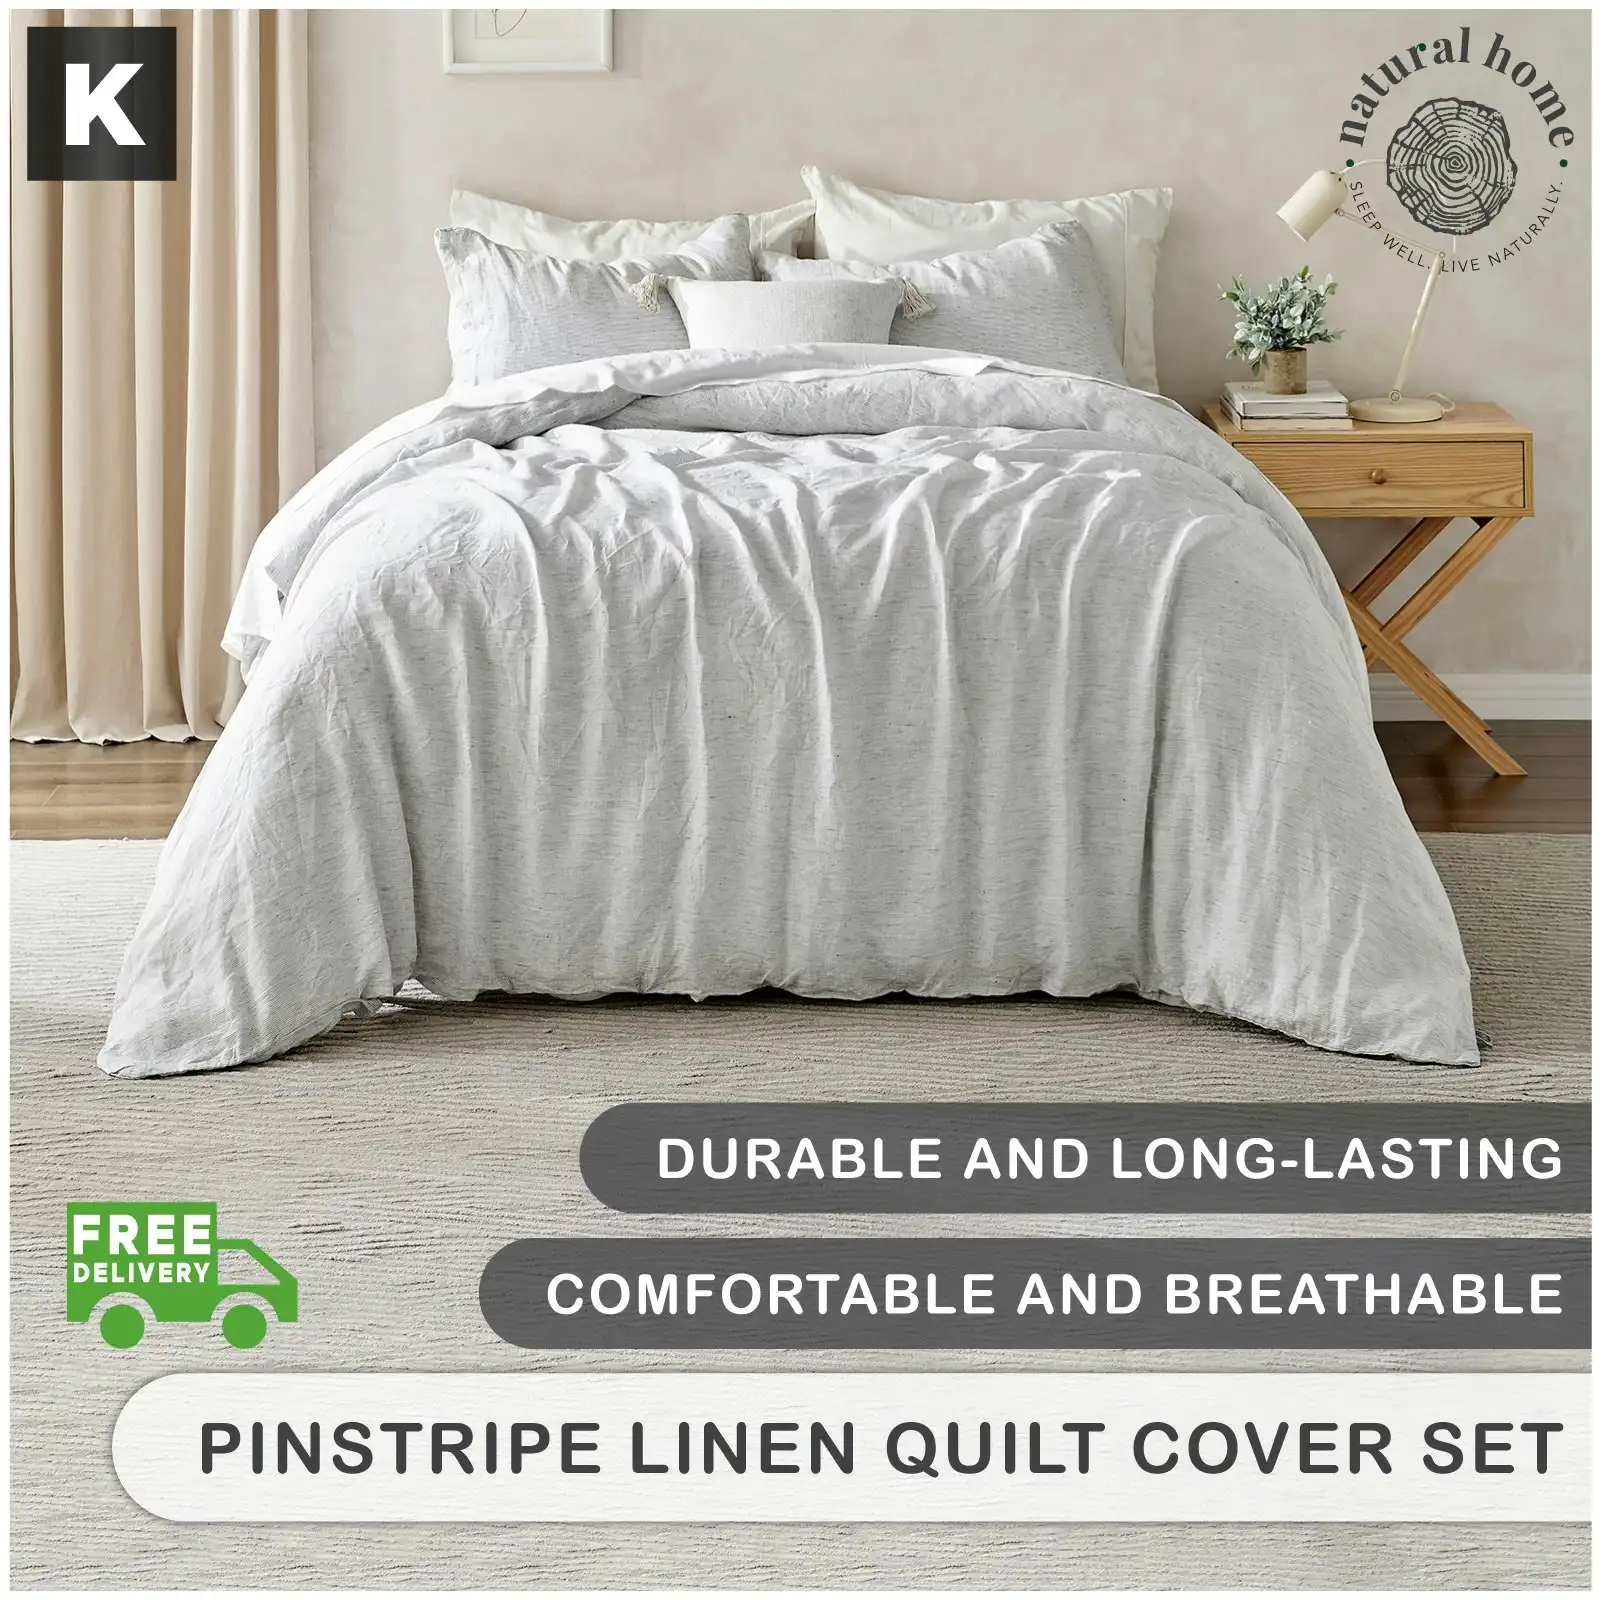 Natural Home Classic Pinstripe Linen Quilt Cover Set Dark with White Pinstripe King Bed